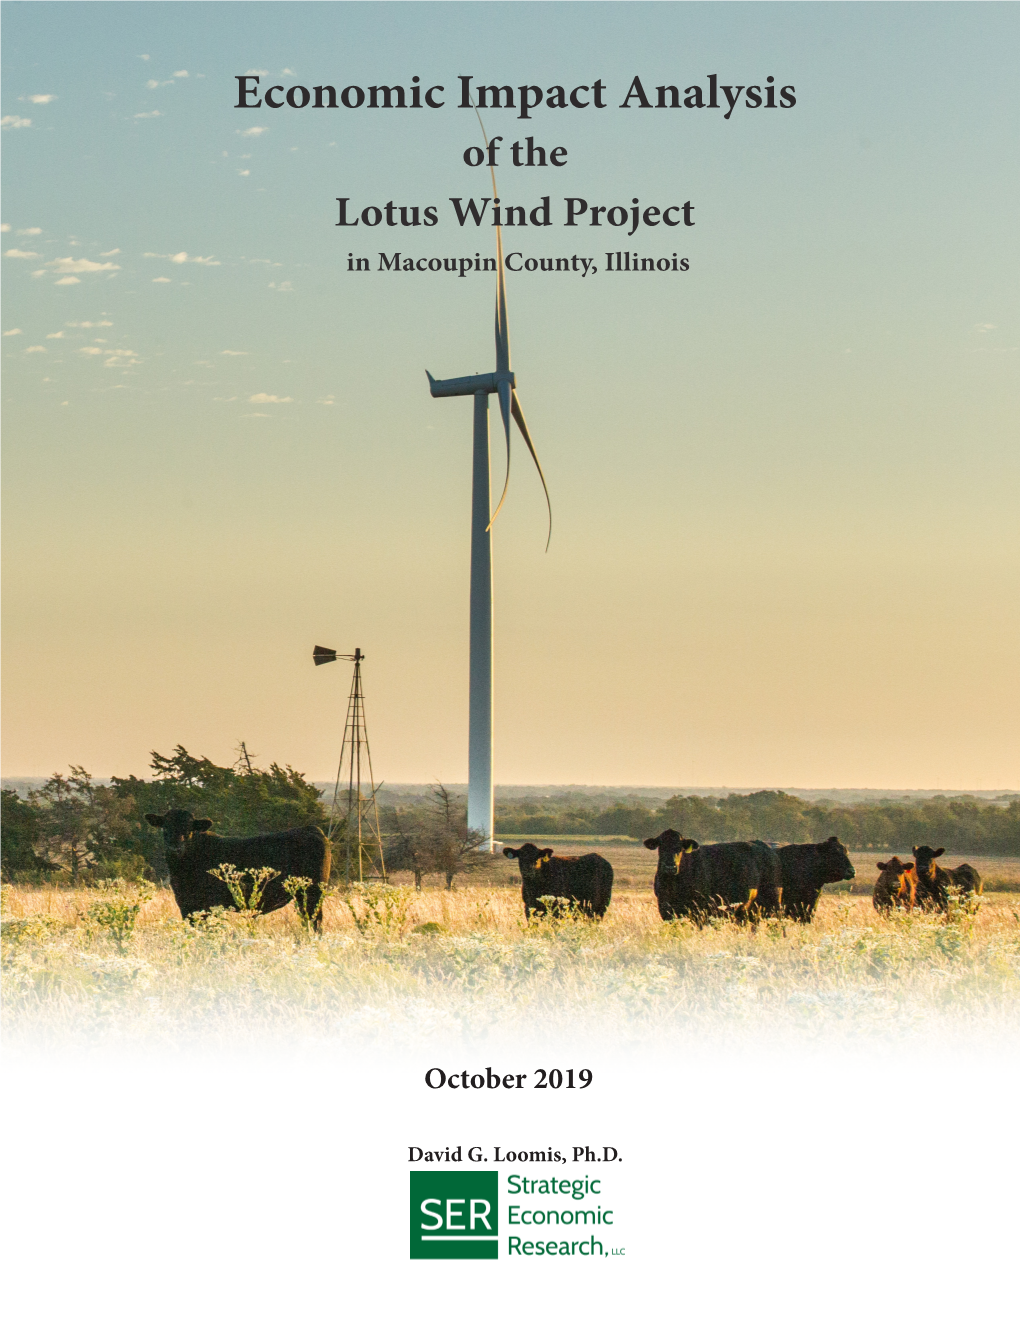 Economic Impact Analysis of the Lotus Wind Project in Macoupin County, Illinois